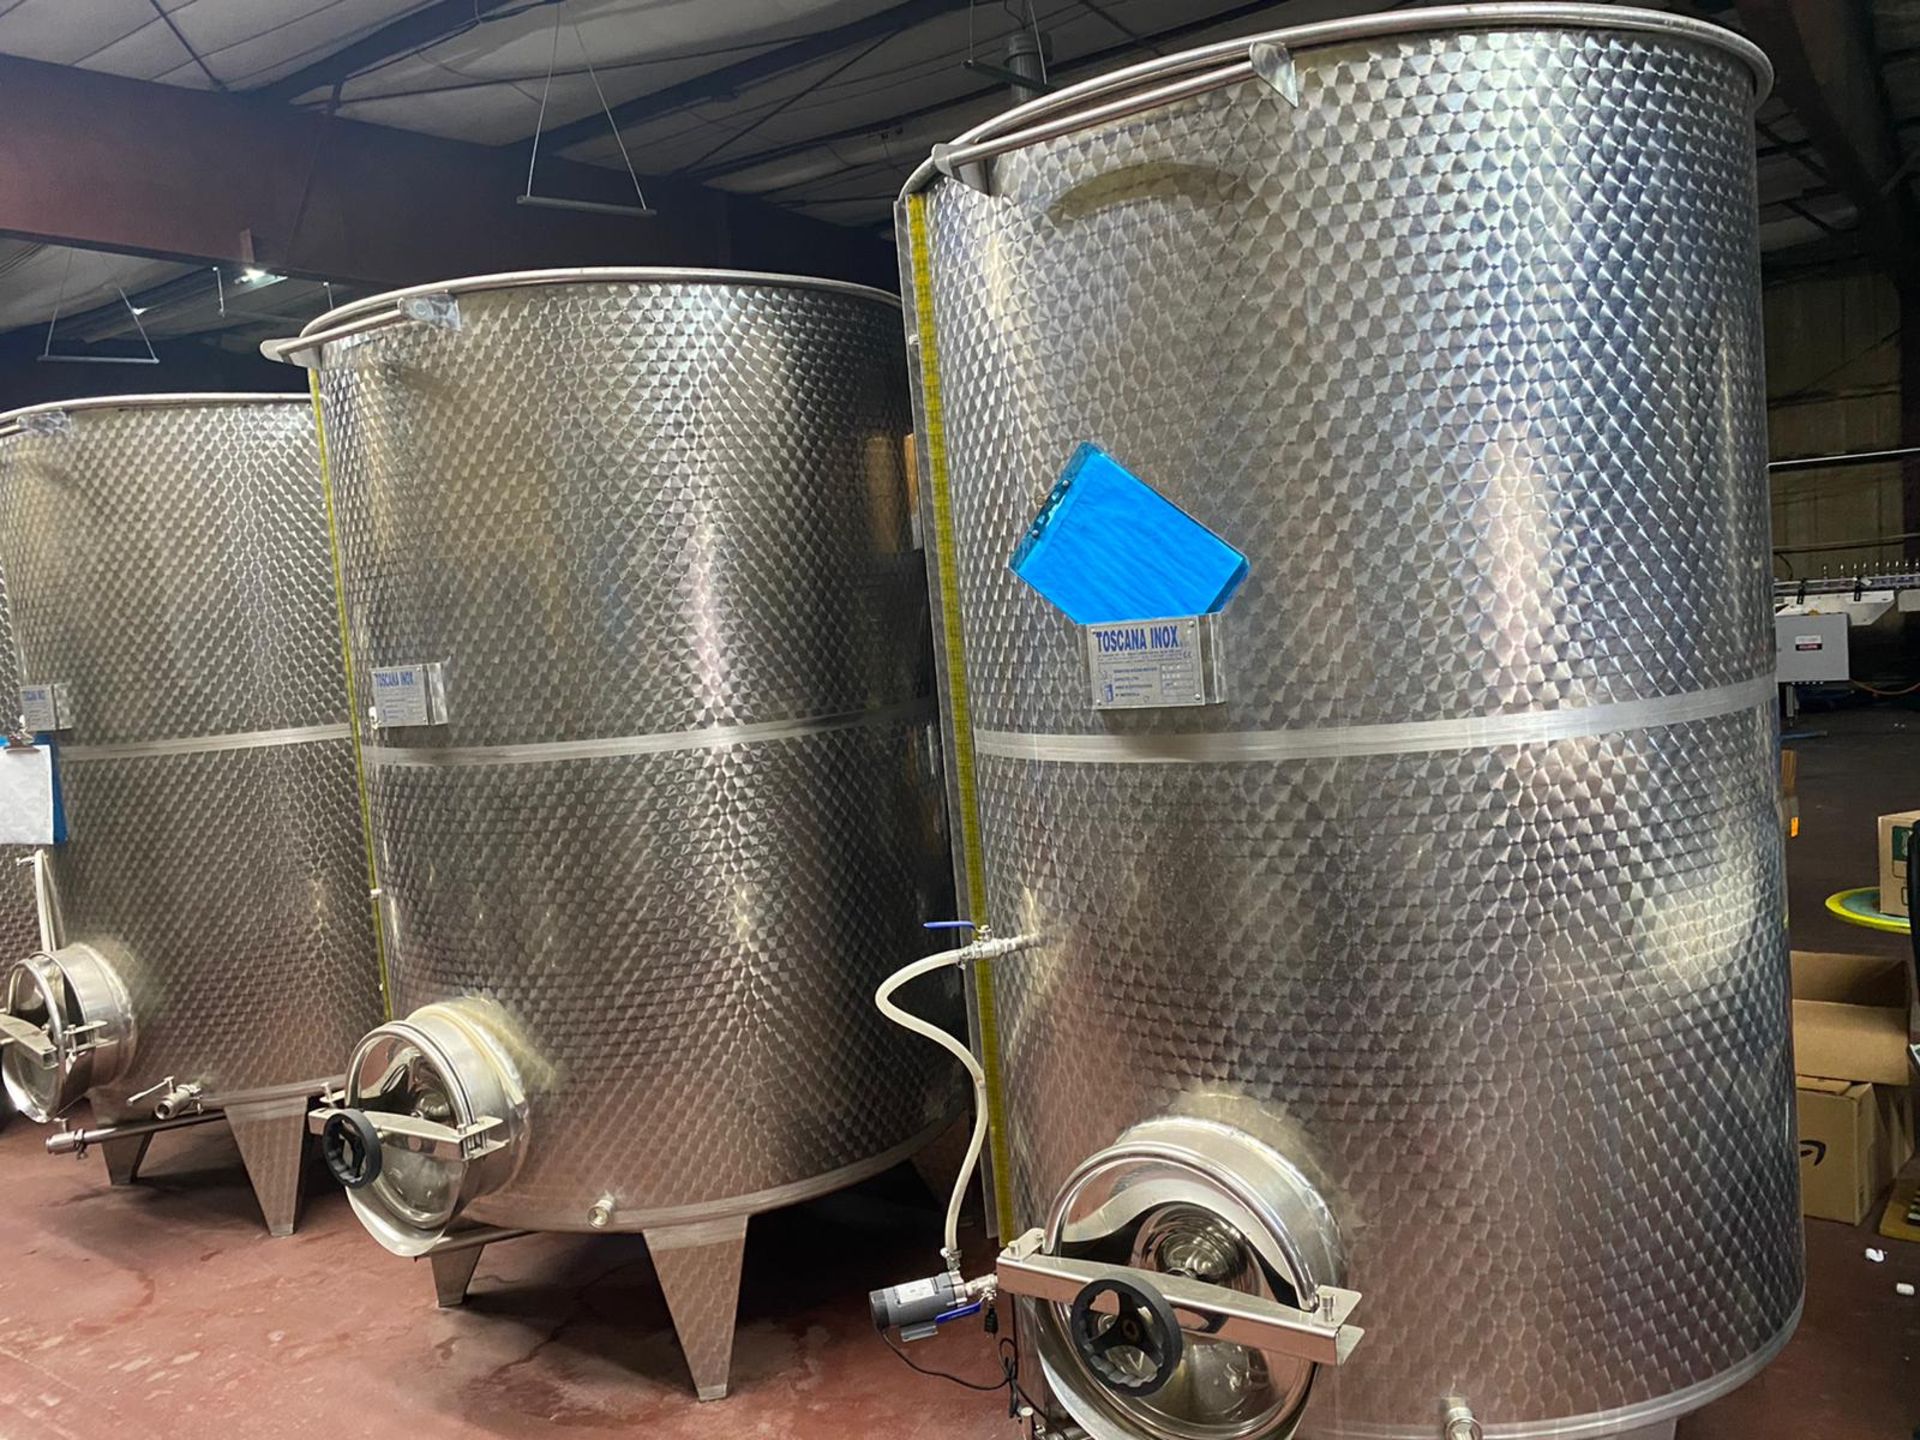 2018 Toscana Inox 3000L Open Top Stainless Steel Tank - Image 2 of 4